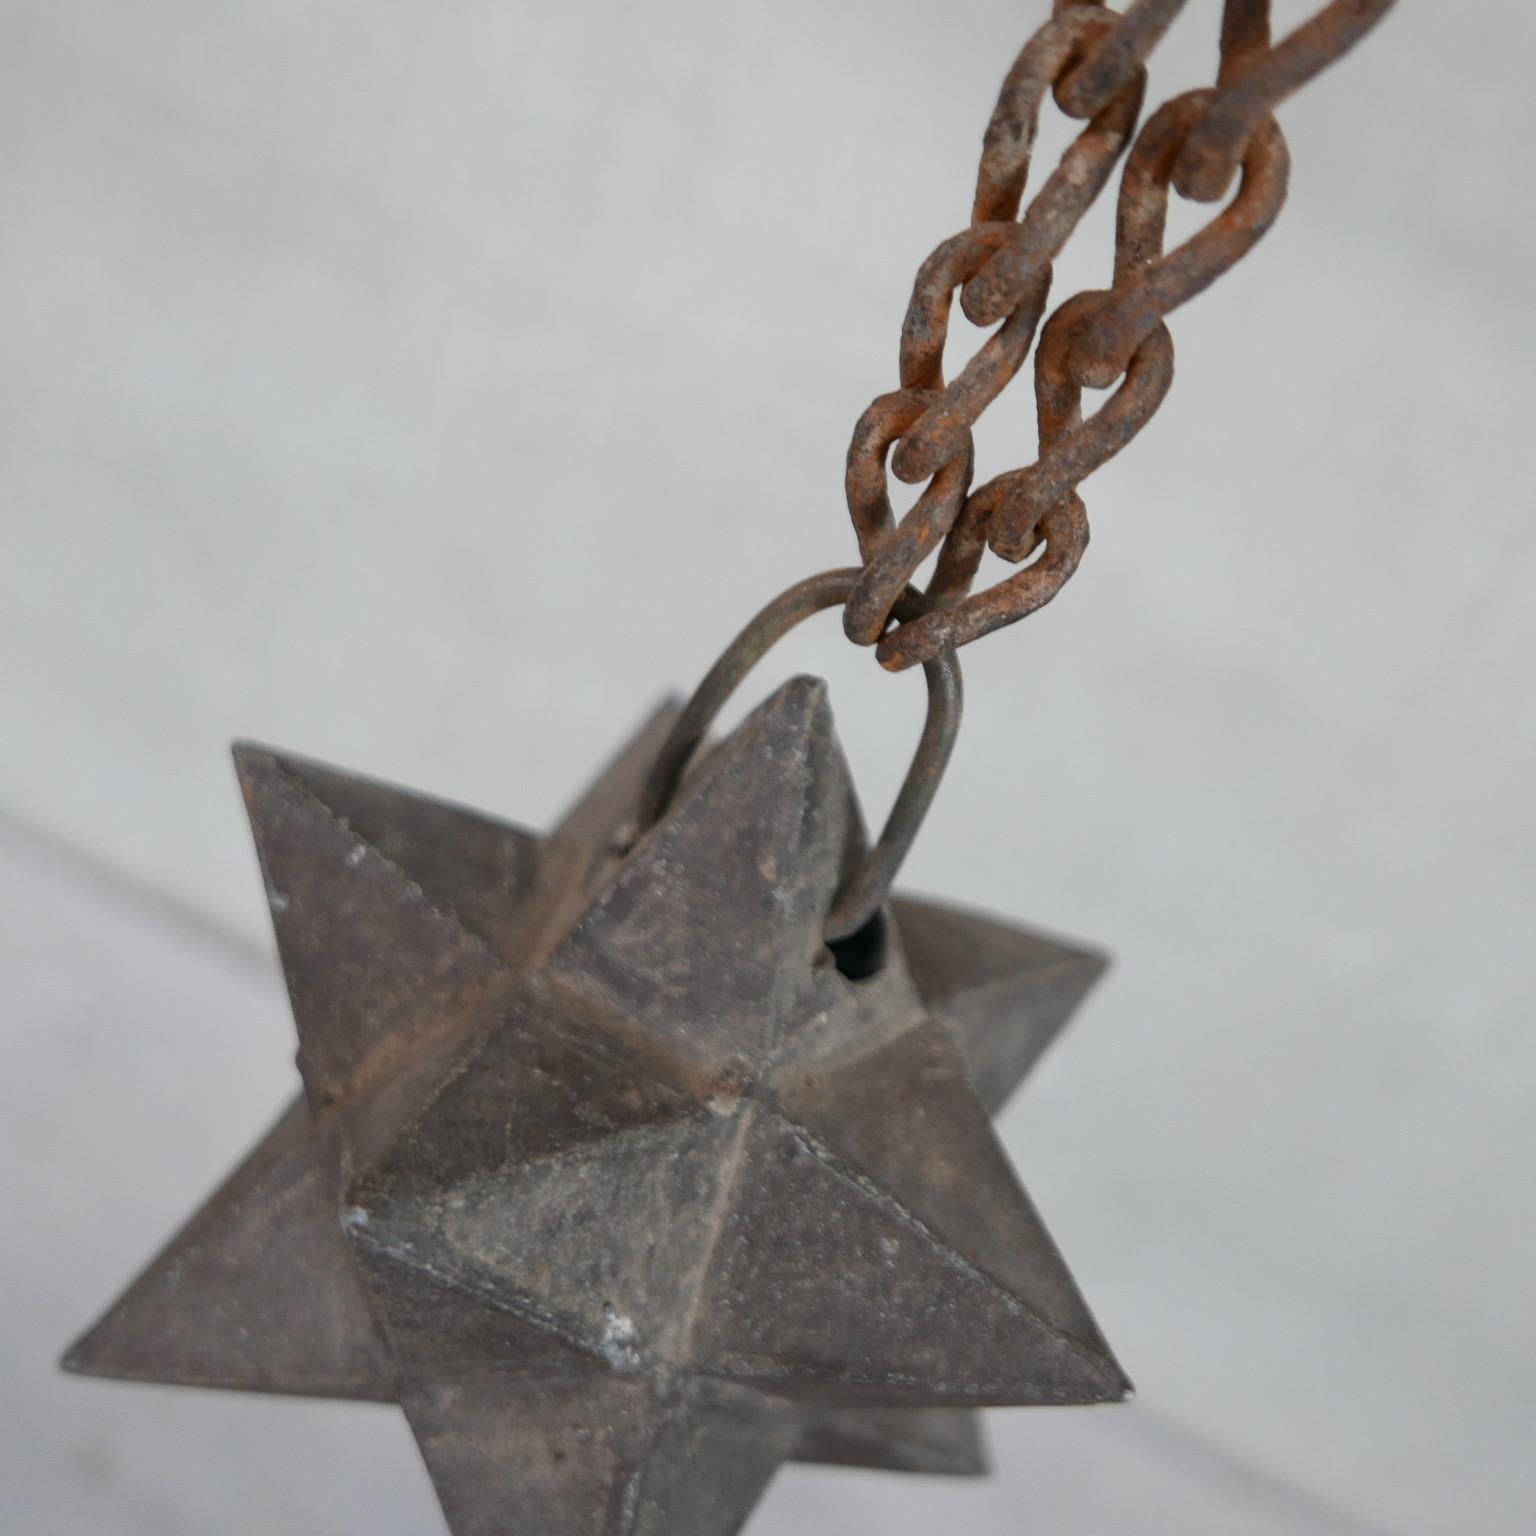 A rare pair of unusual star curios. 

Geometric forms hoisted on a chain. 

France, 19th century. 

Iron, naturally patinated. 

One has damage, priced accordingly. 

Can be used hanging or as a desk or shelf curio. 

Location: Belgium